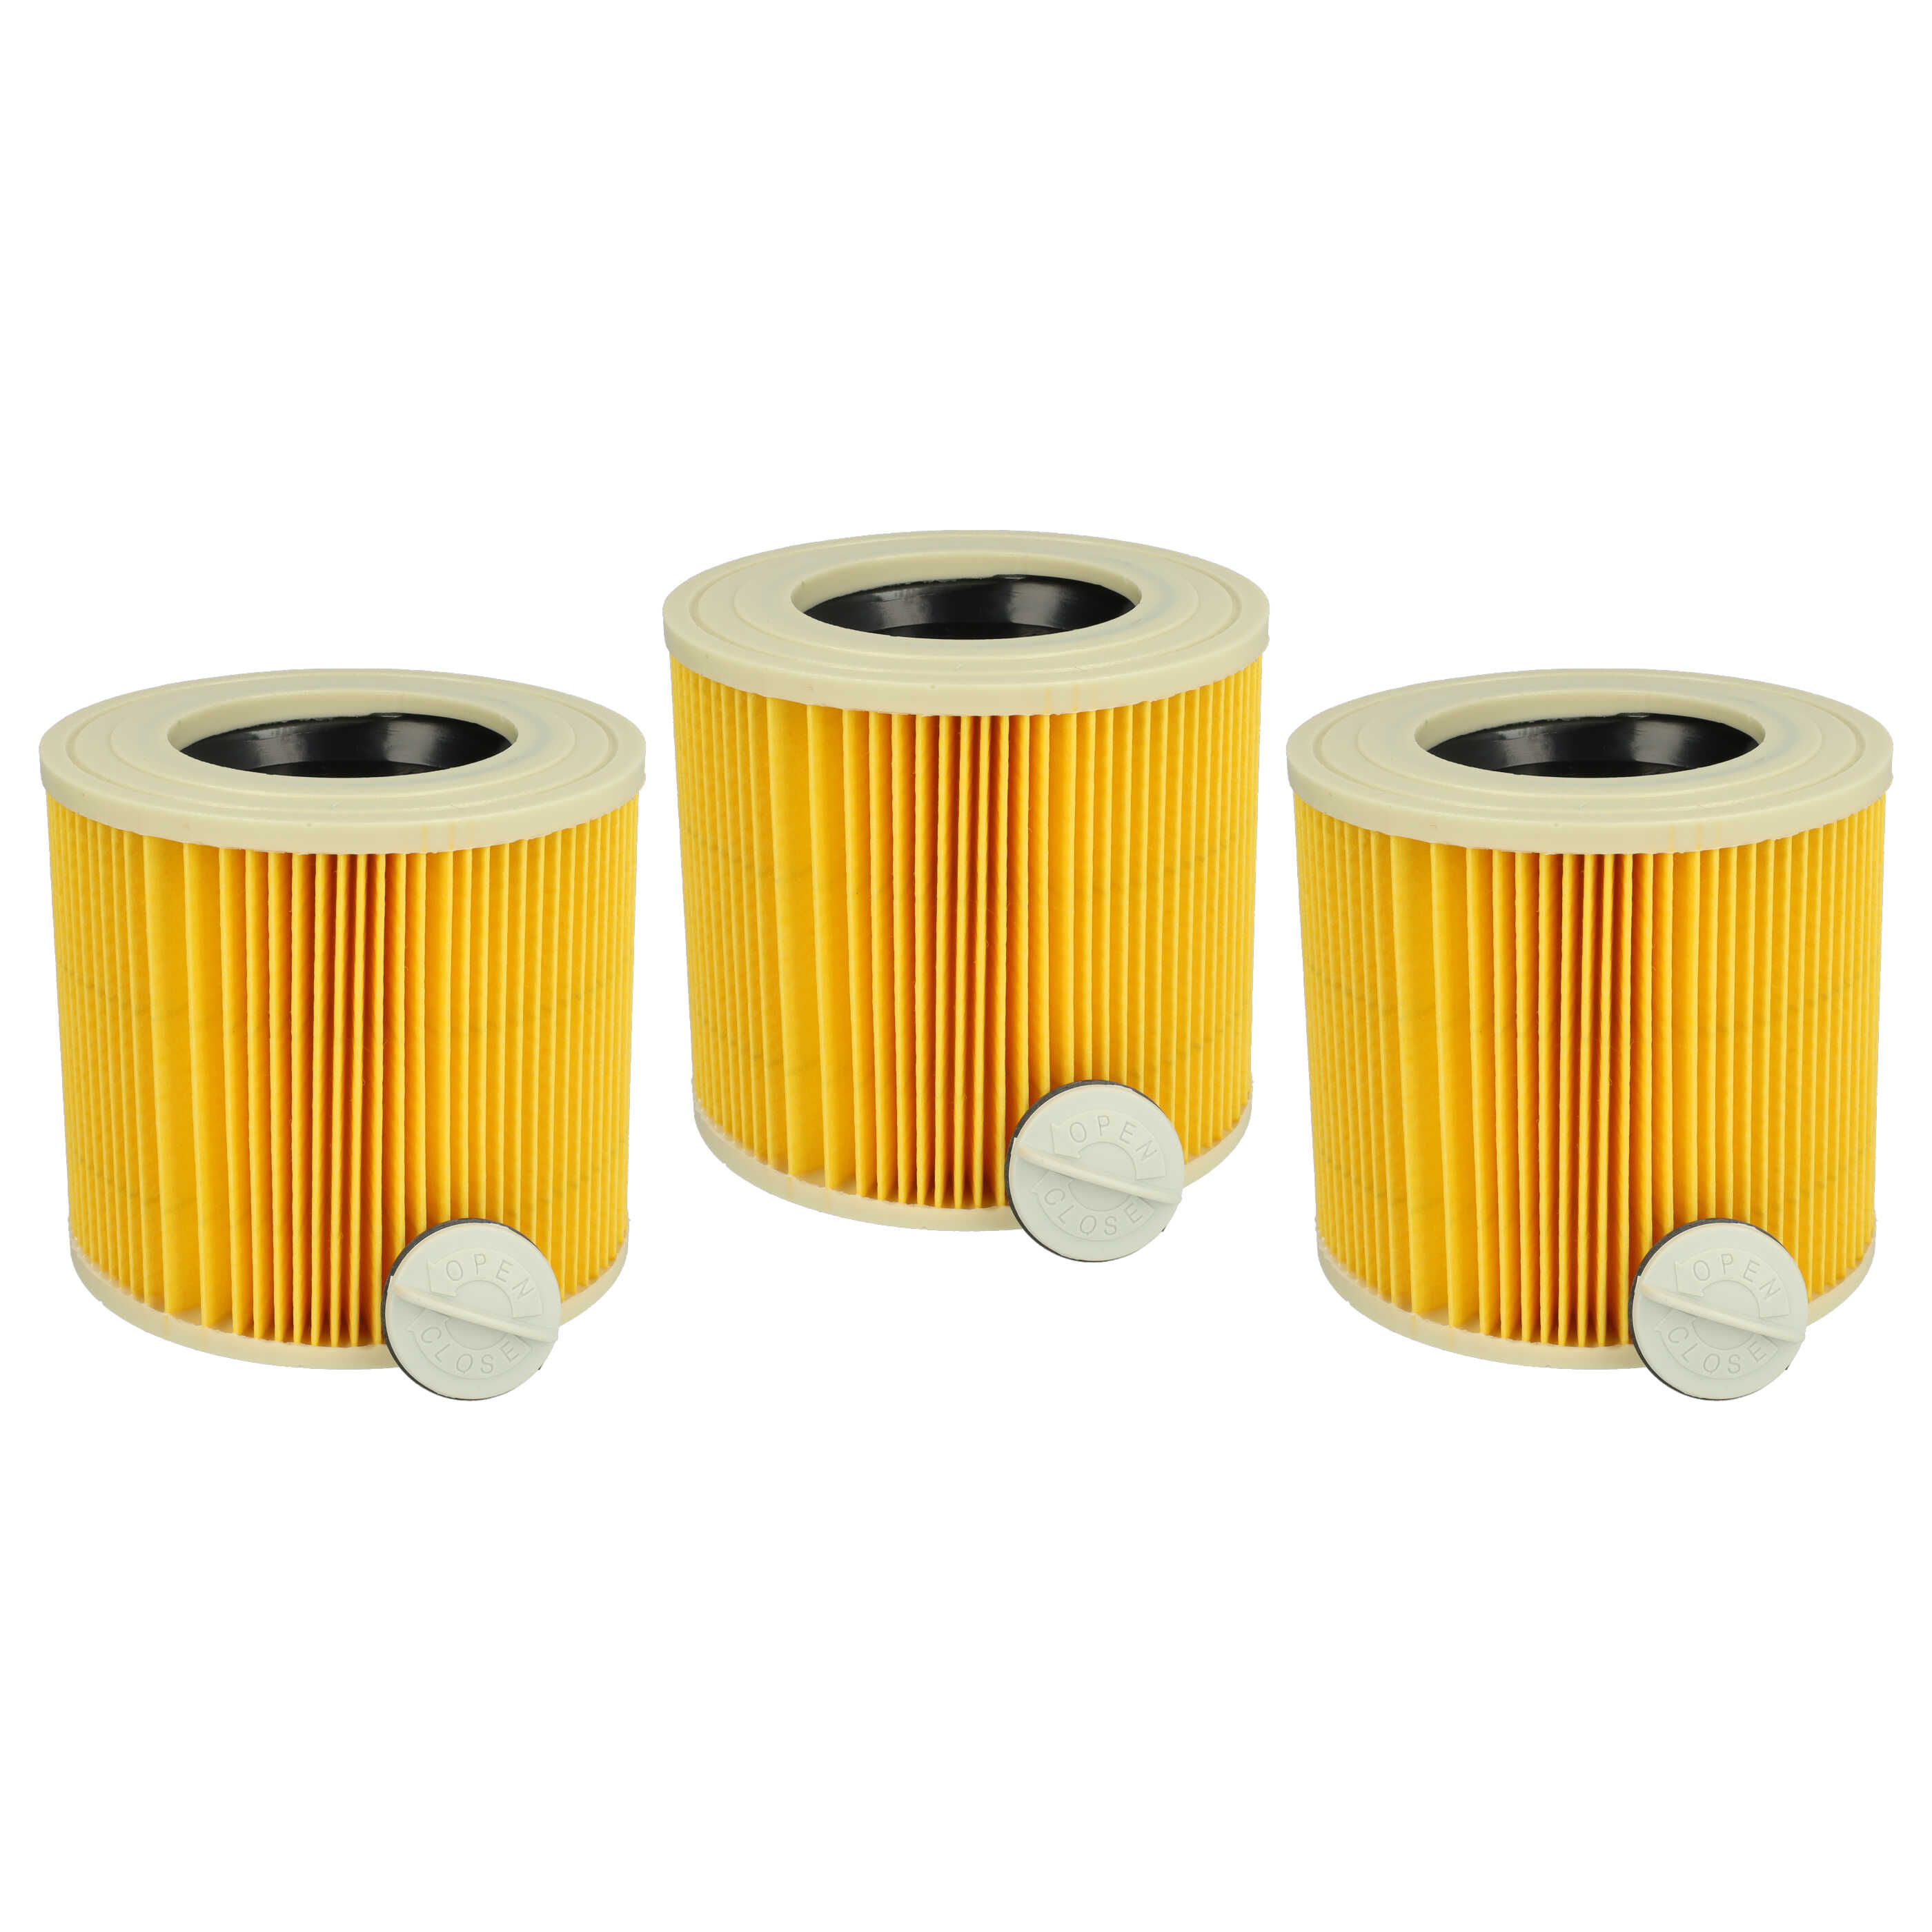 3x cartridge filter replaces Kärcher 2.863-303.0, 6.414-552.0, 6.414-547.0 for Baier Vacuum Cleaner, yellow